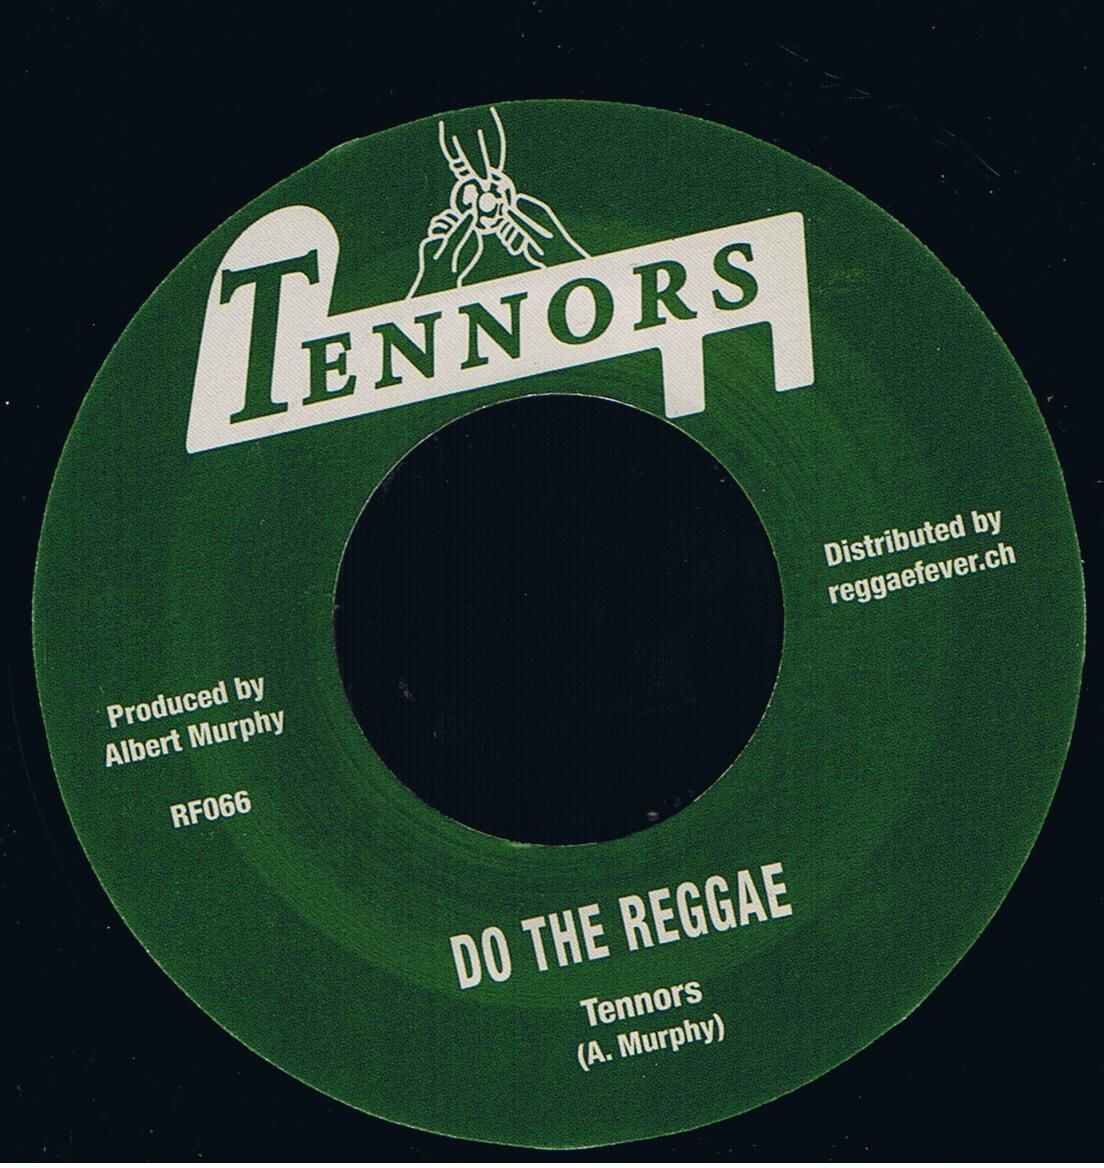 The Tennors - Do The Reggae / The Pacesetters - Nimrod Leap (7")